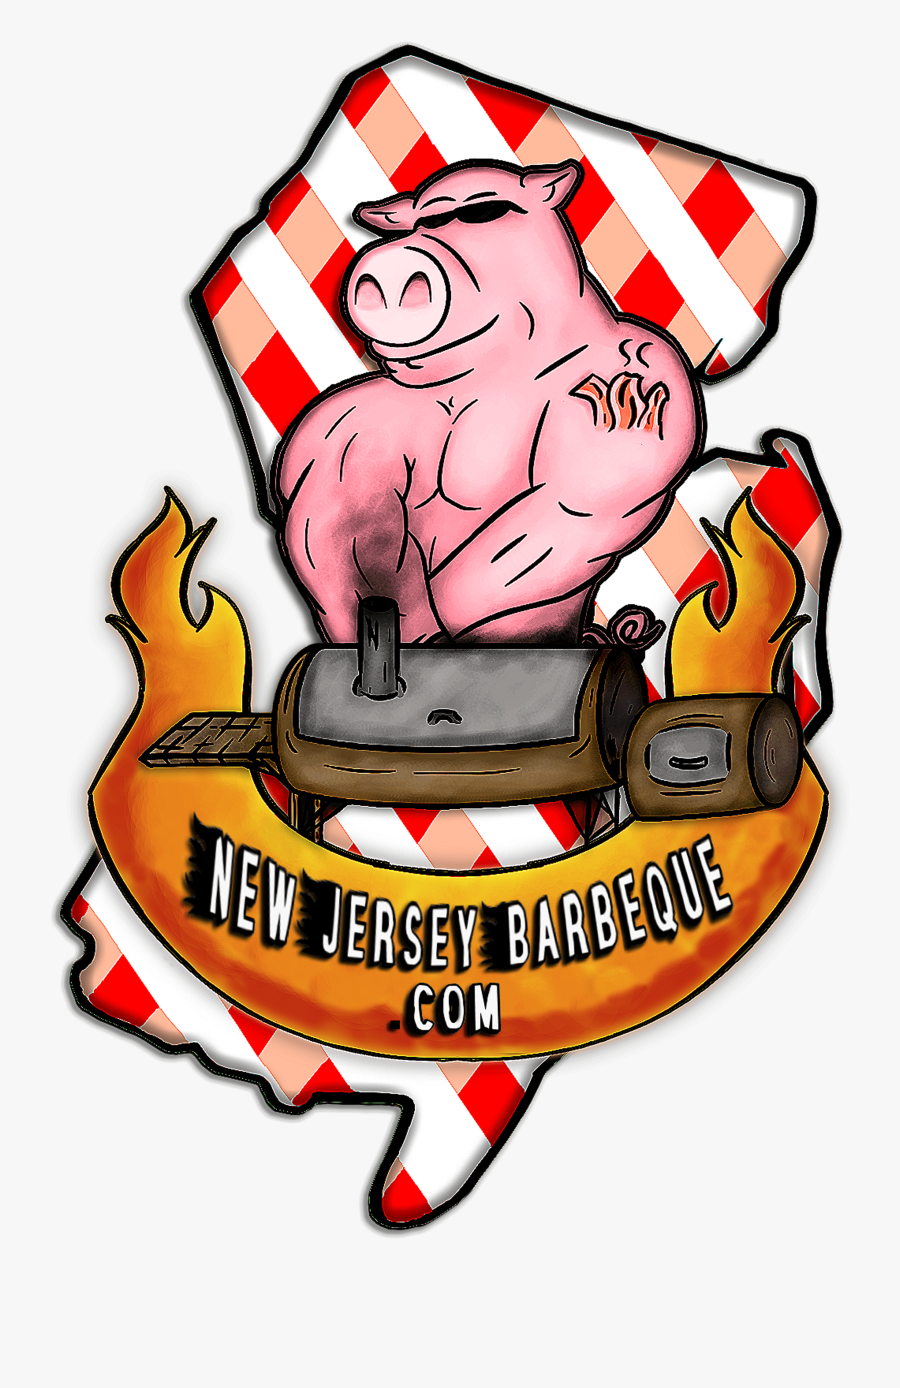 New Jersey Barbeque - Barbecue, Transparent Clipart